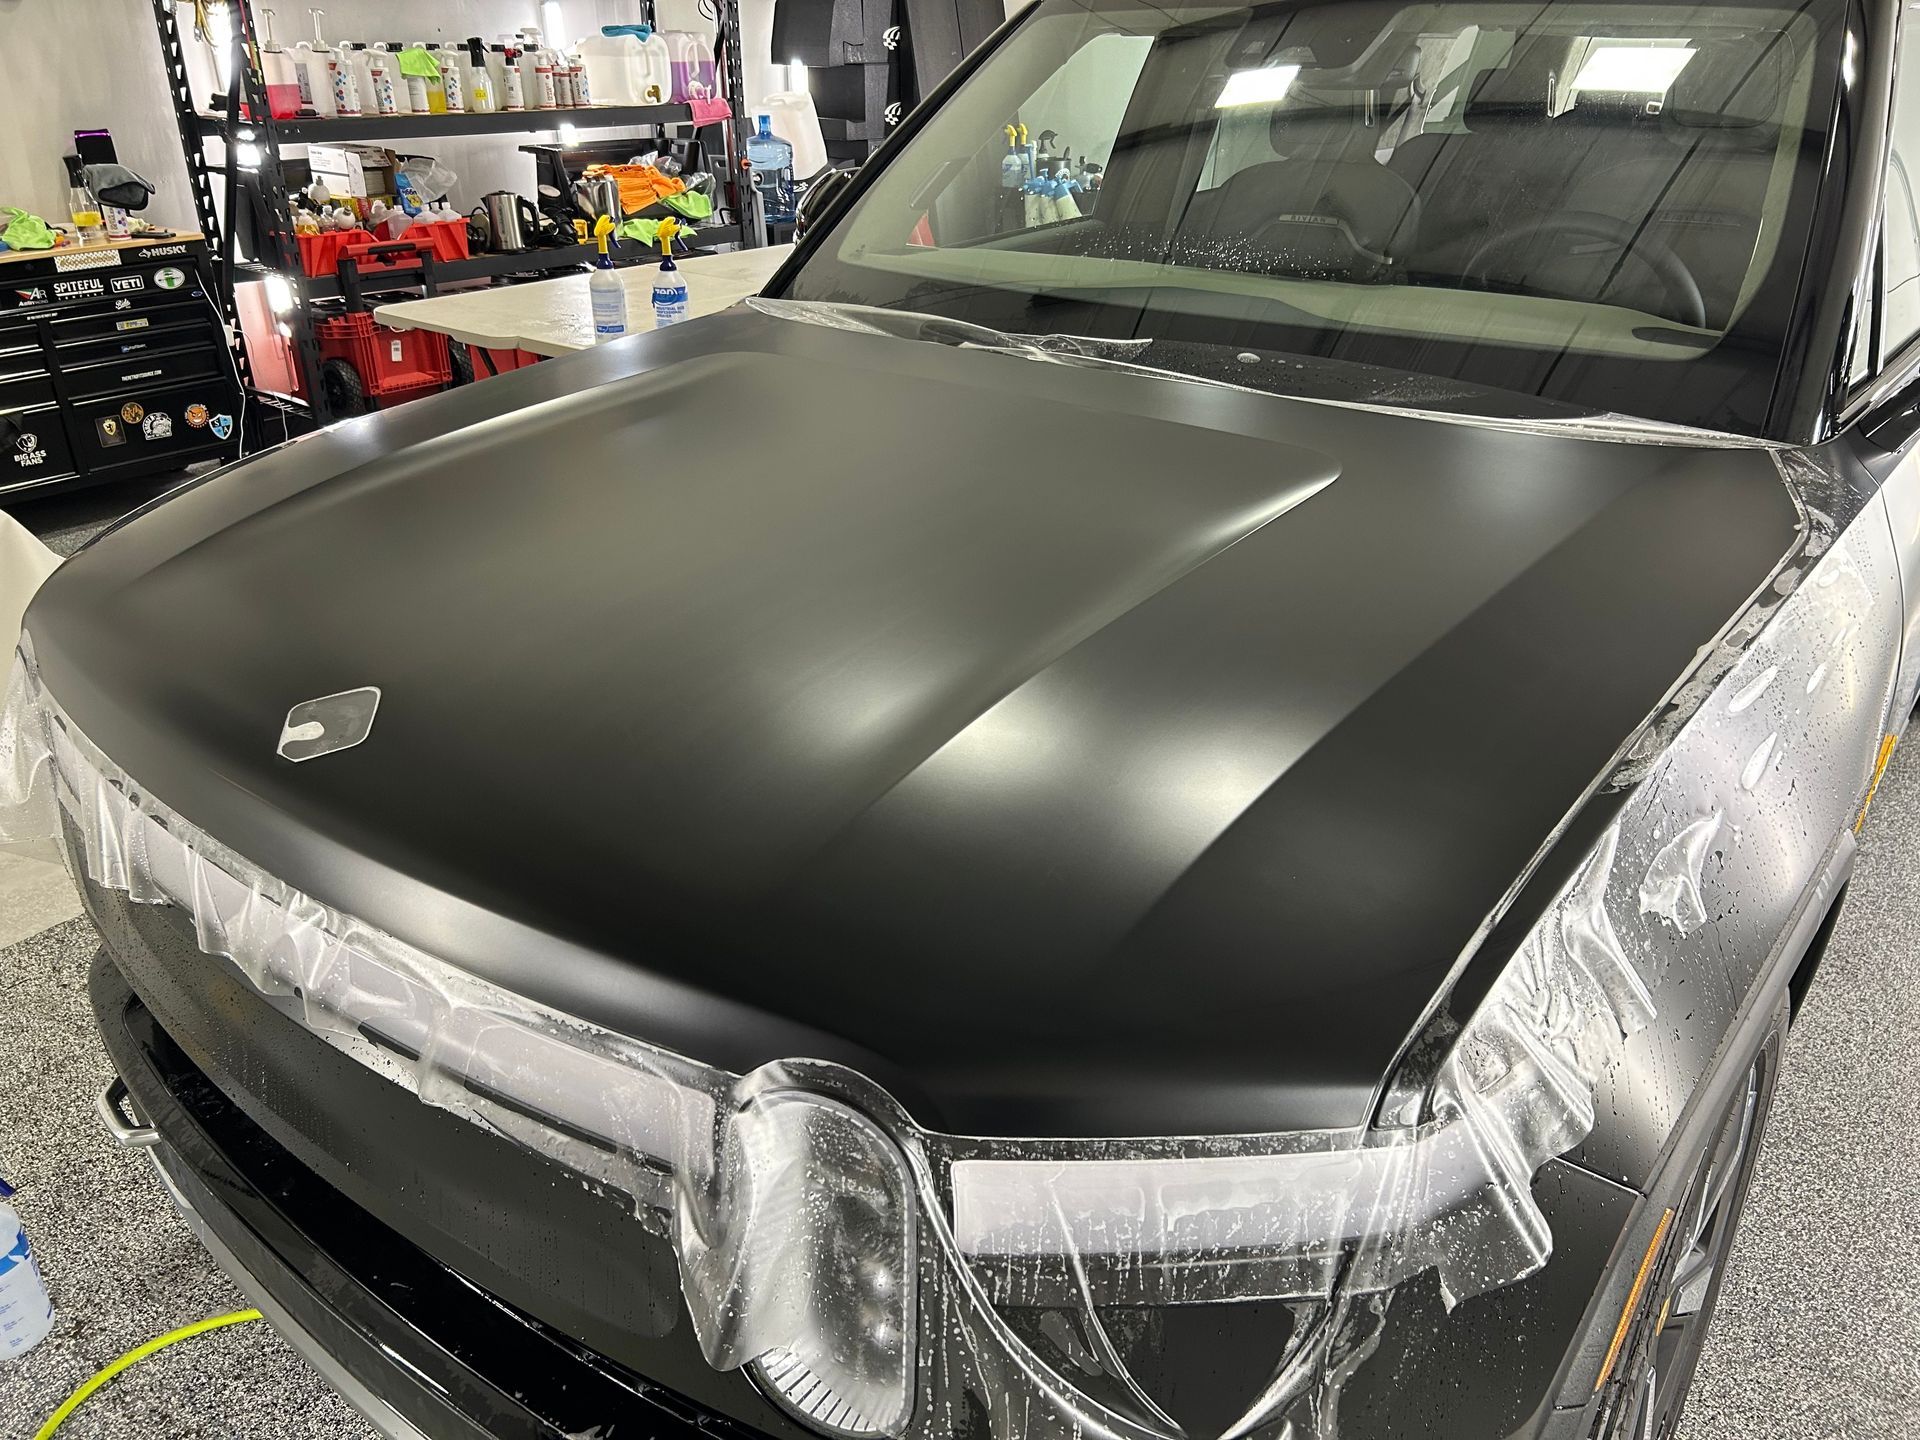 Rivian R1S getting full body matte paint protection film application by Suntek and a ceramic coating application by GTECHNIQ